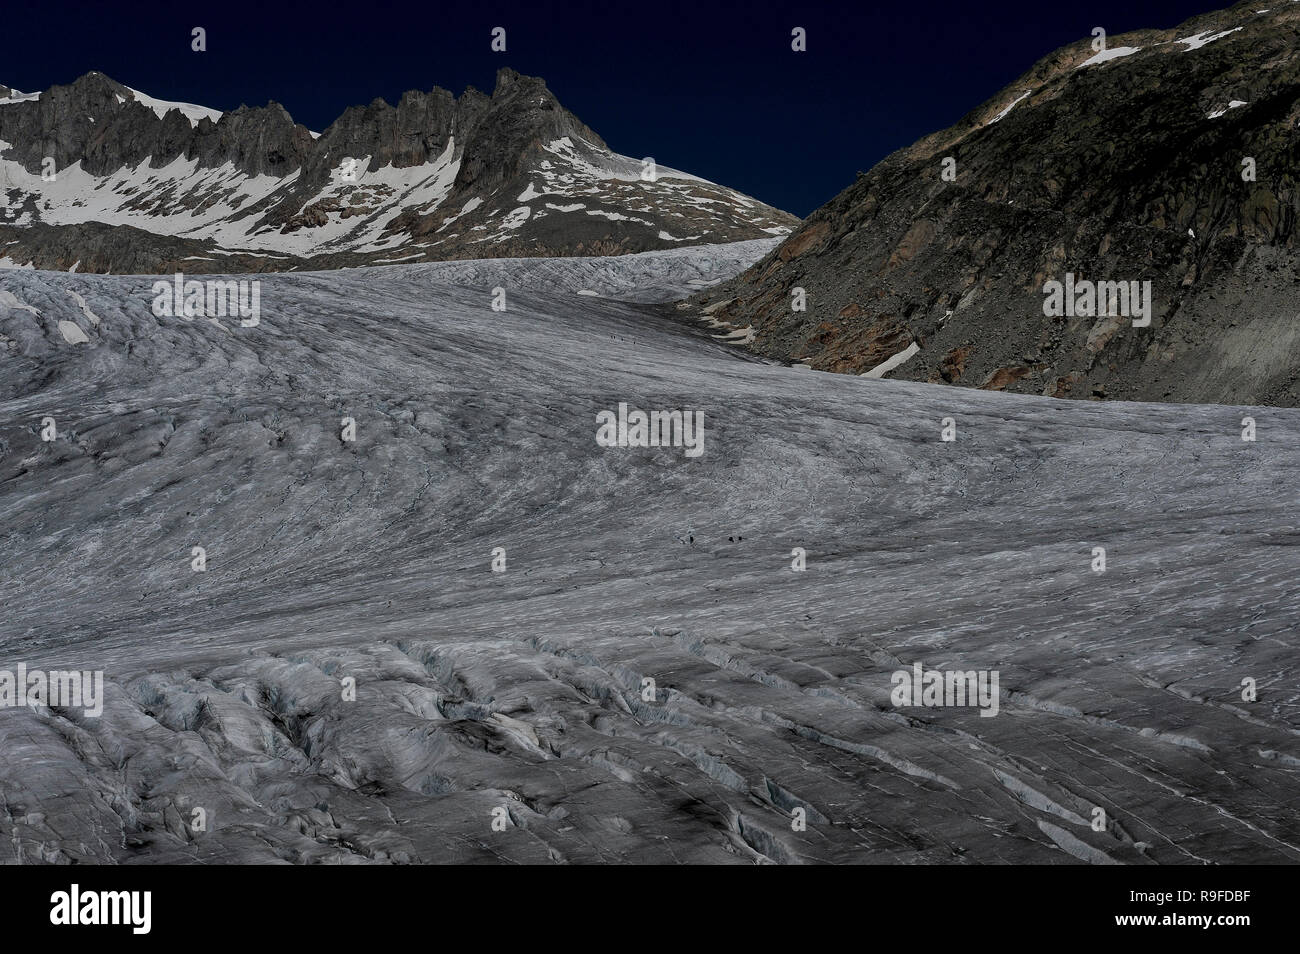 Rhône Glacier, Valais canton, Switzerland: scientists measure glacial shrinkage far out on the deeply fissured ice flowing from the Tieralplistock. Stock Photo